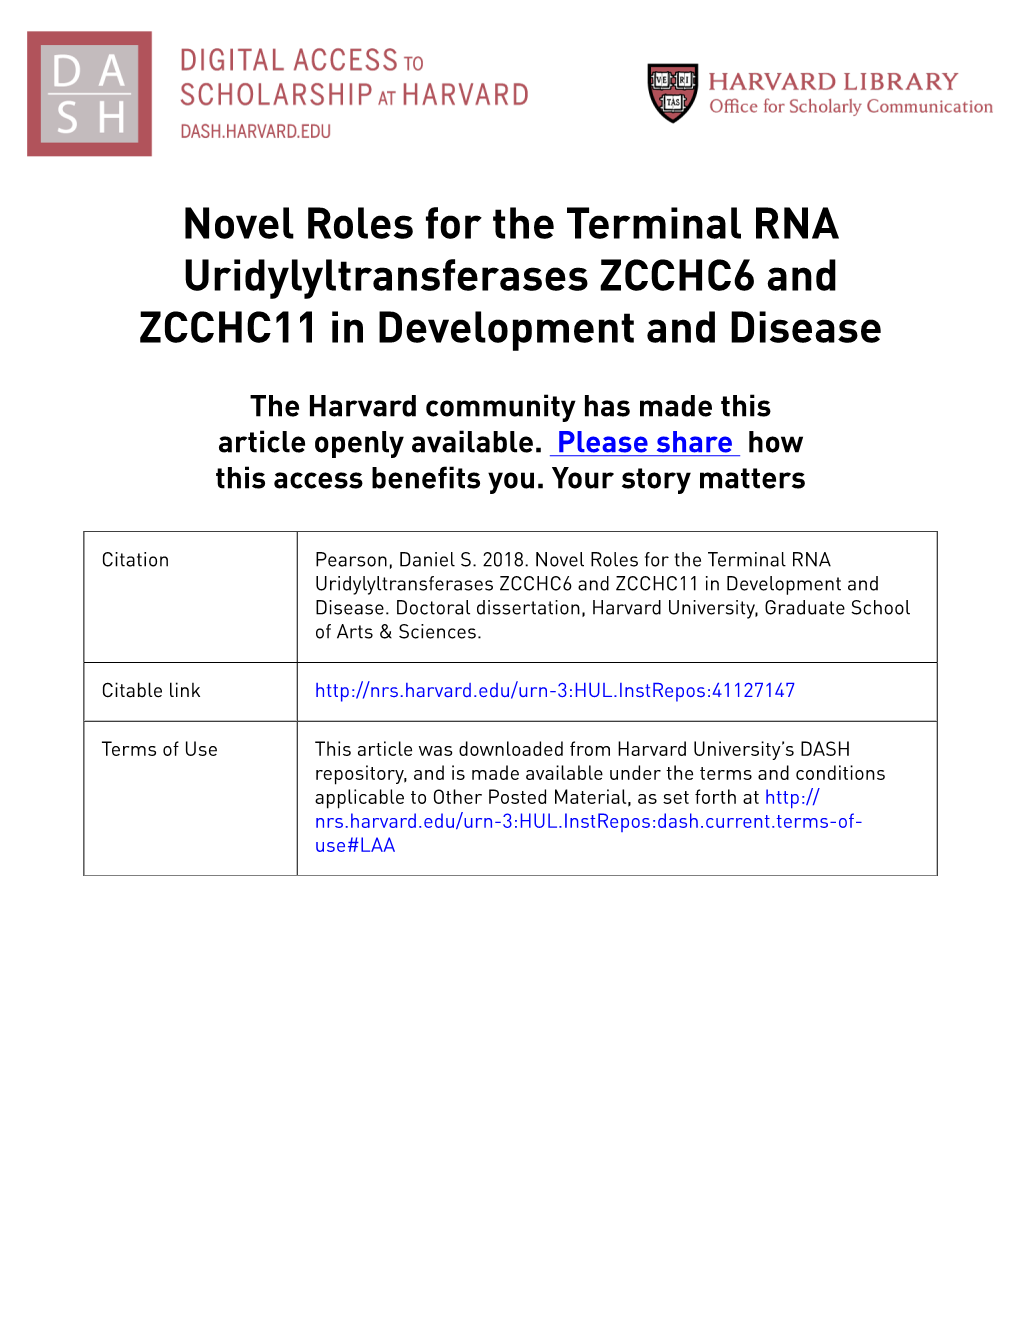 Novel Roles for the Terminal RNA Uridylyltransferases ZCCHC6 and ZCCHC11 in Development and Disease